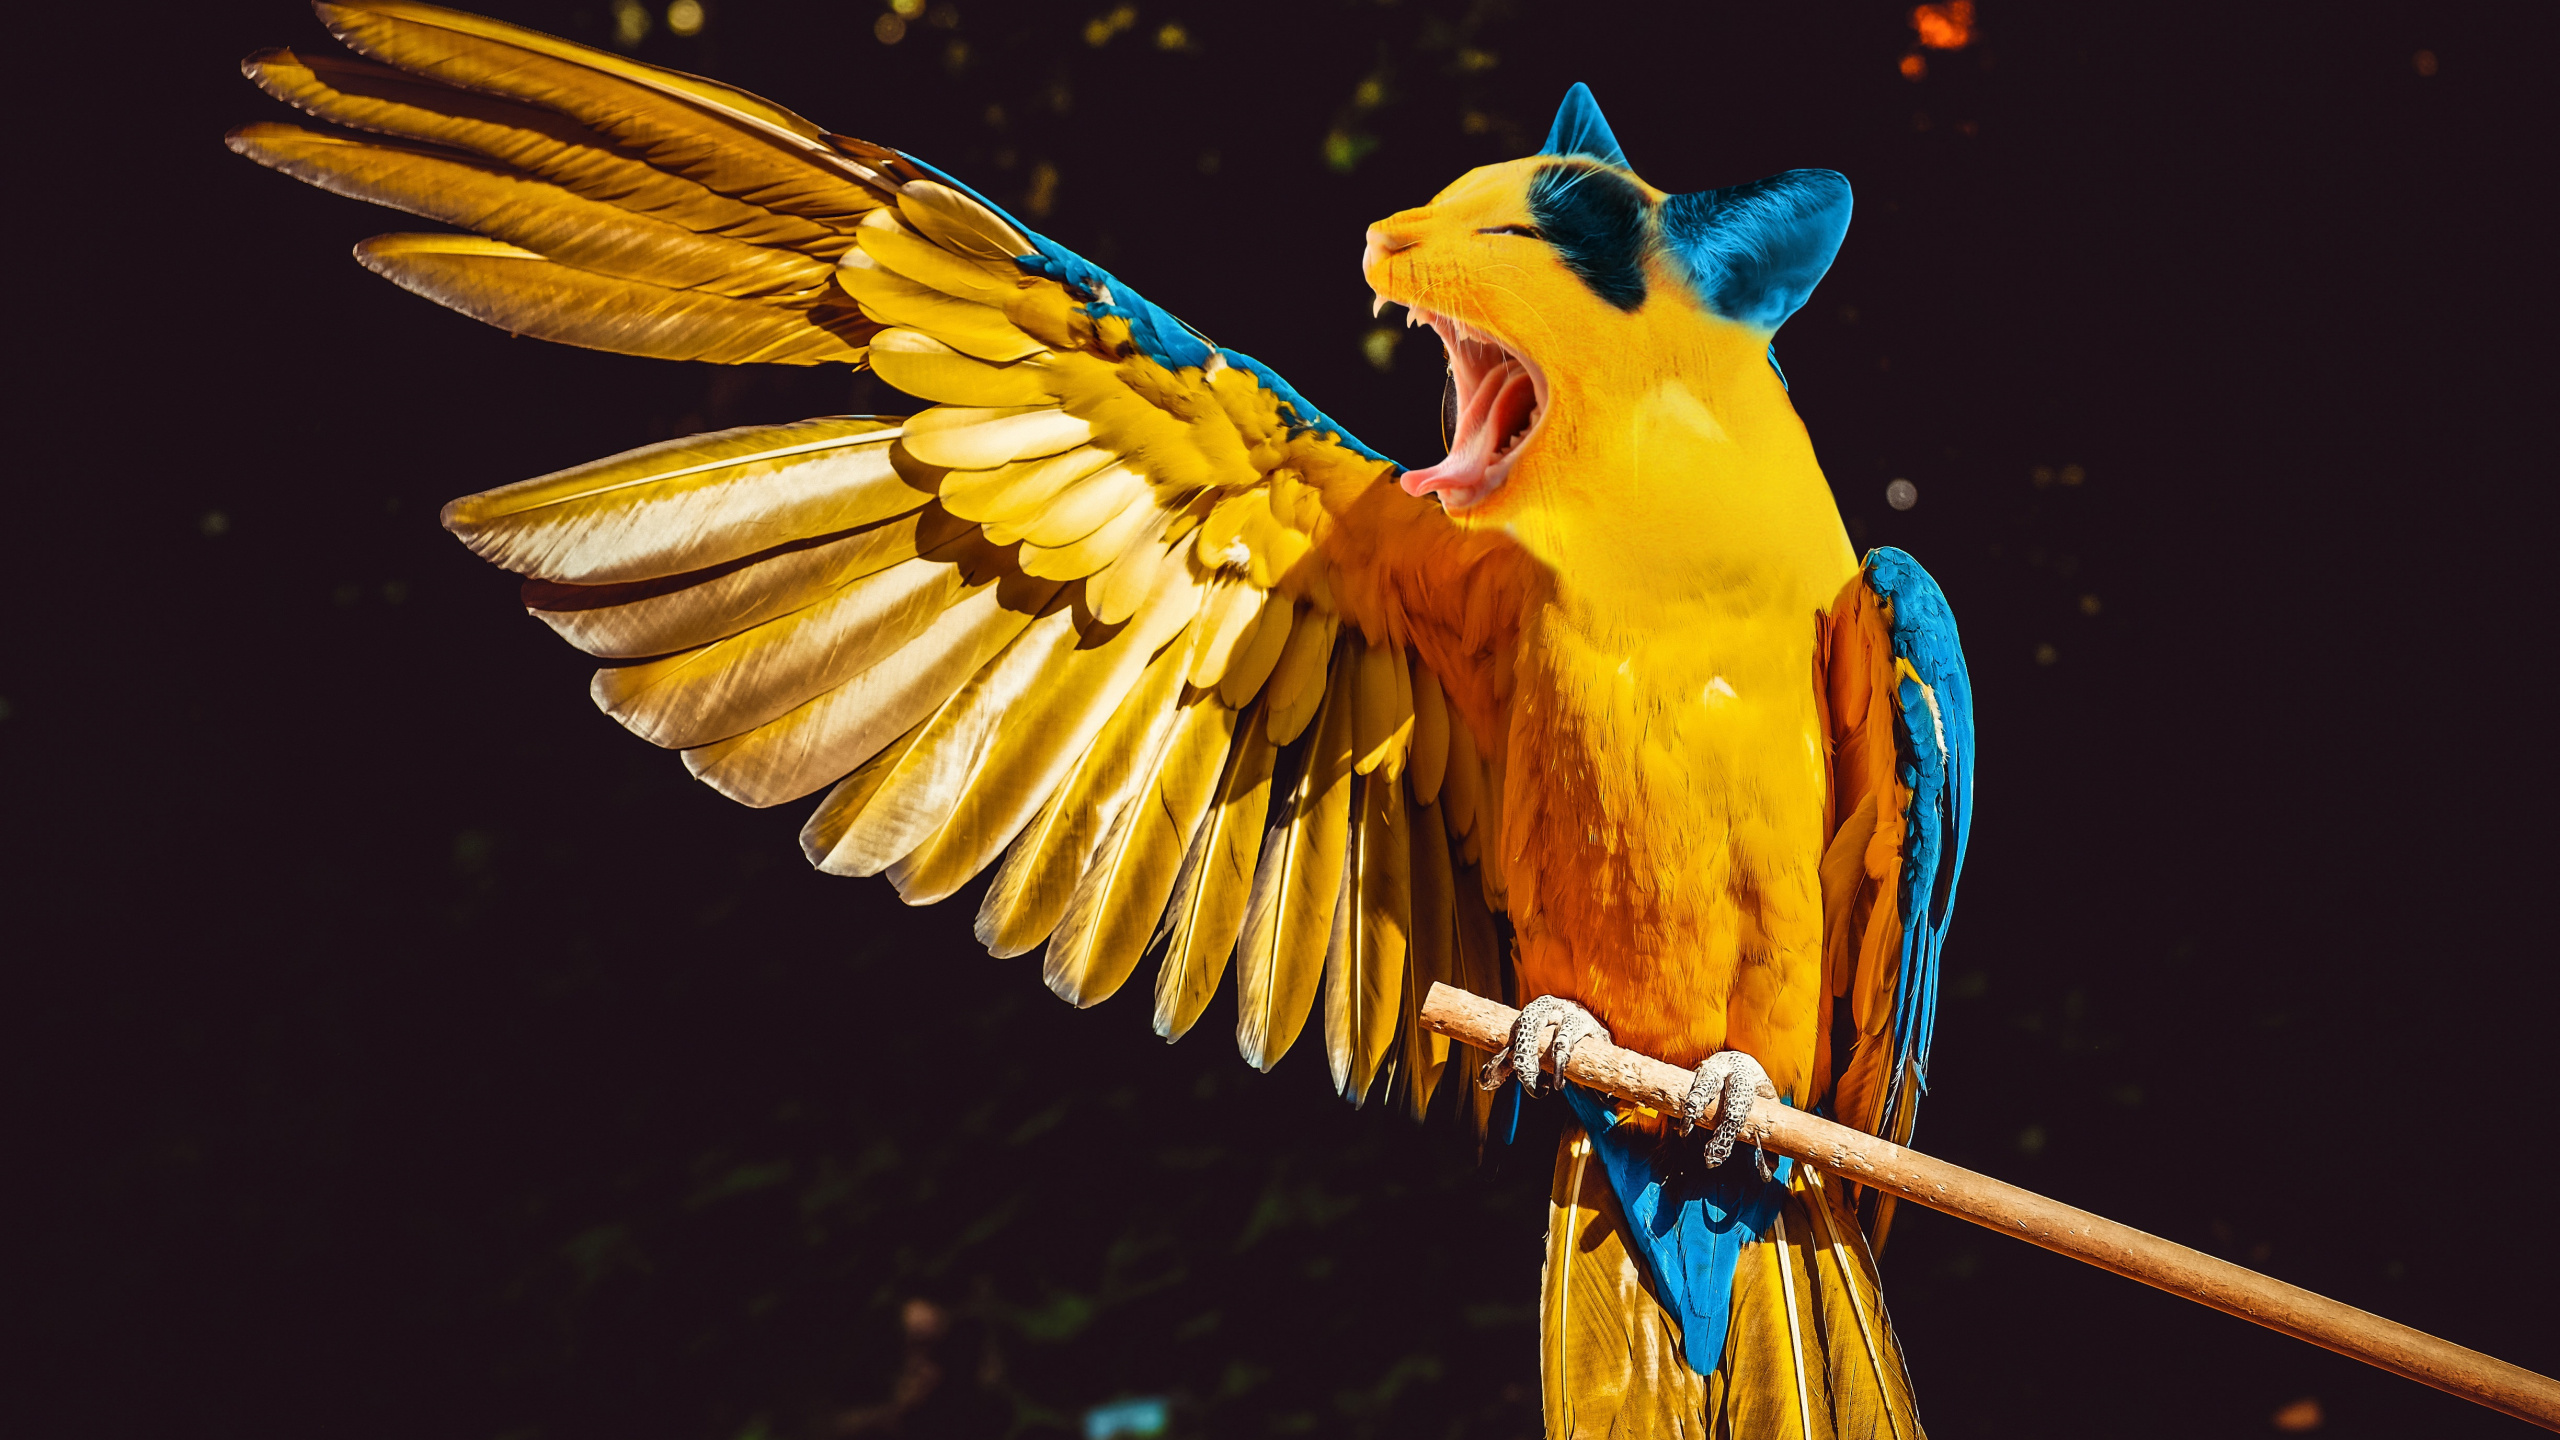 Yellow Blue and Orange Parrot. Wallpaper in 2560x1440 Resolution